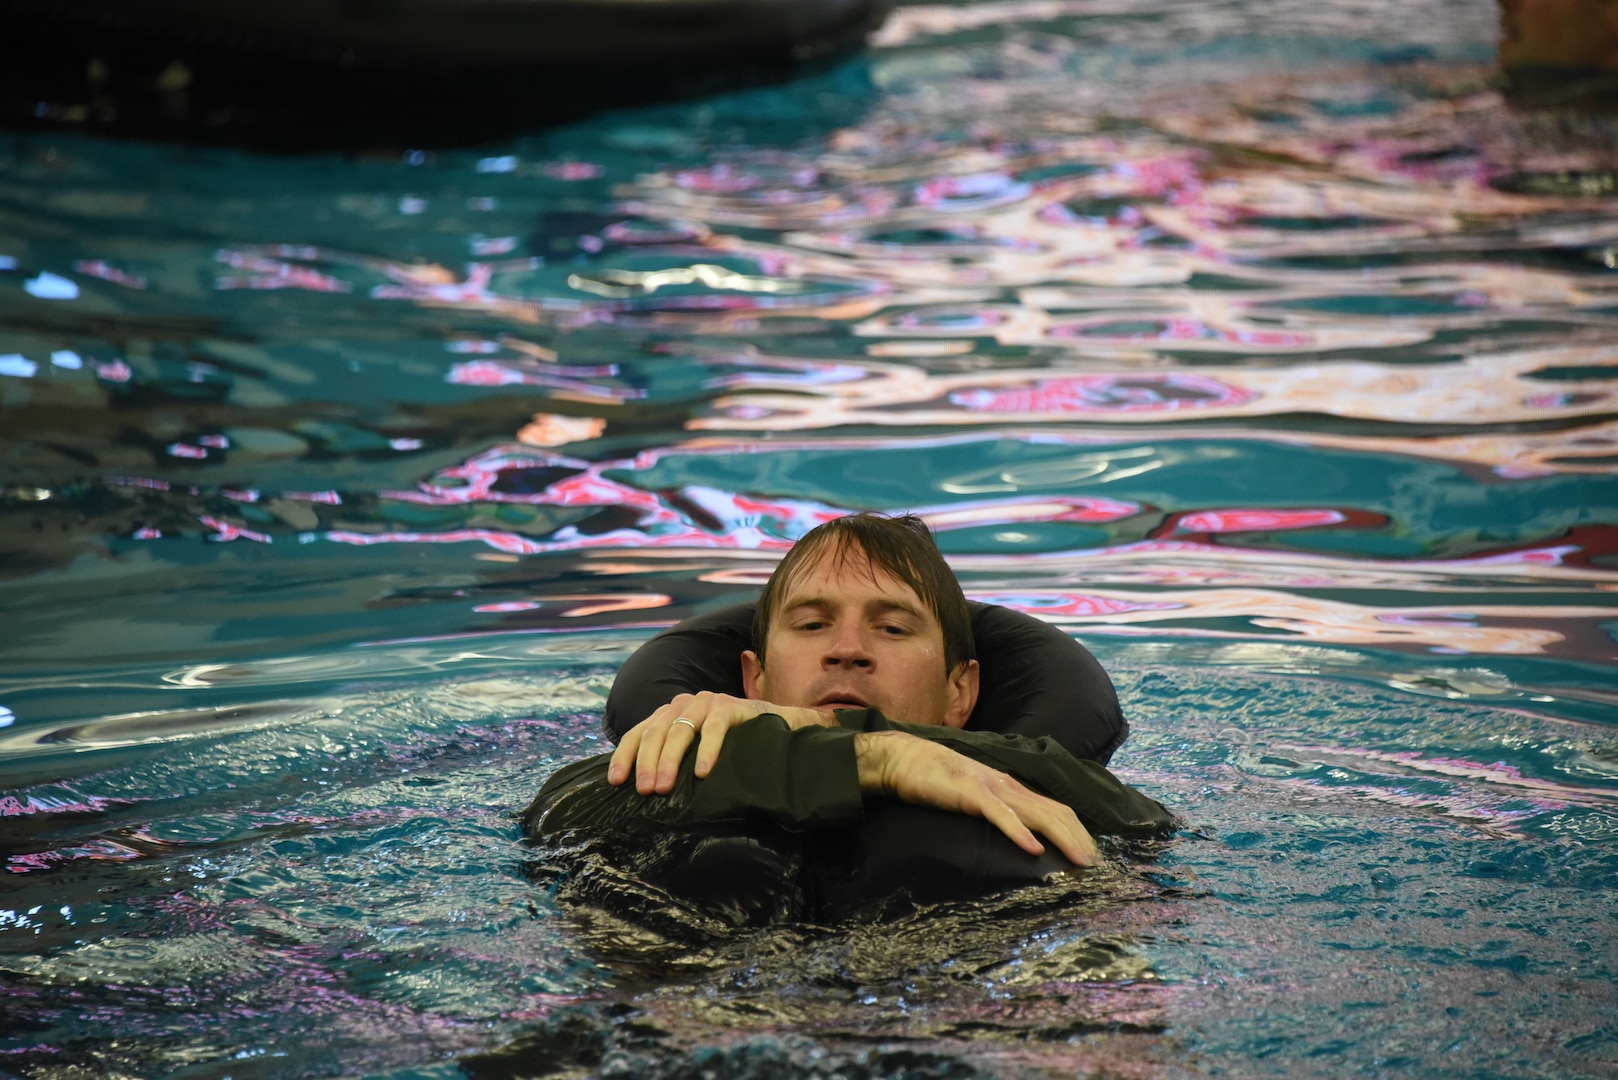 Maj. Addison Harding, an F-16 pilot assigned to the 114th Fighter Wing in Sioux Falls, South Dakota, swims during a SERE refresher course at the Midco Aquatic Center in Sioux Falls Sept. 30, 2022.